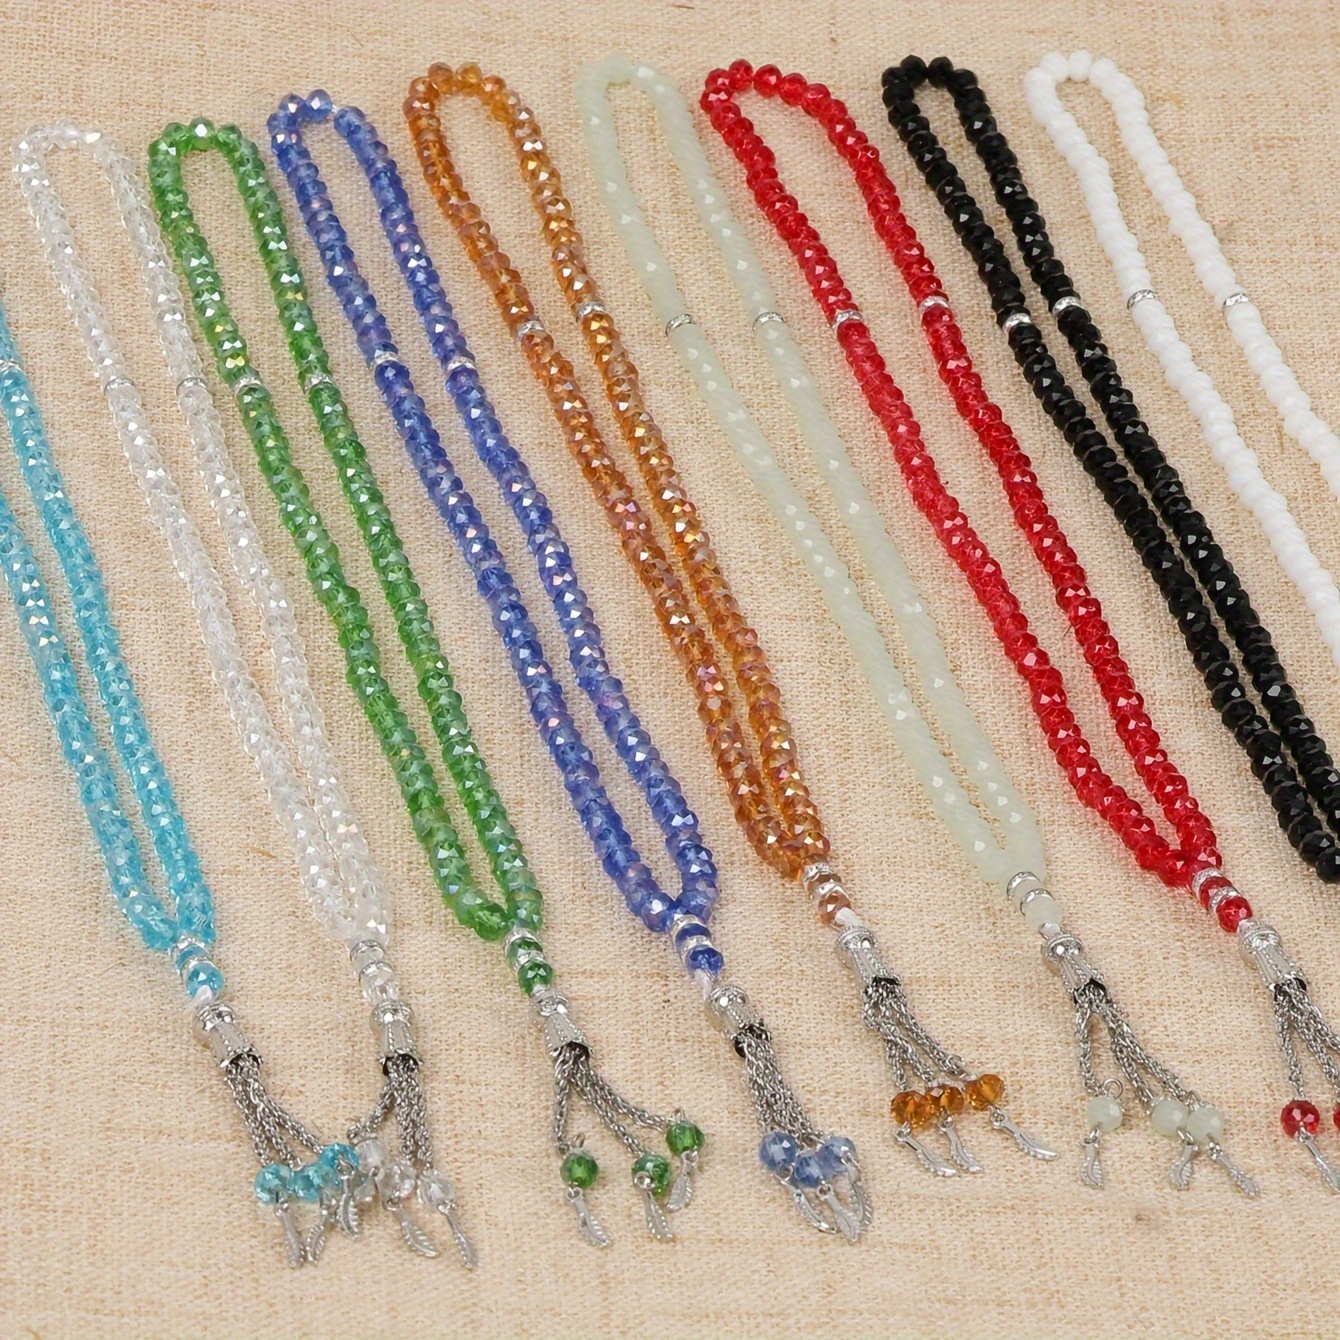 

Multi-color Faceted Prayer Beads, 99 Count, Elegant Silvery Feather Pendant, Chic And Cute Ladies' Accessory For Meditation And Fashion